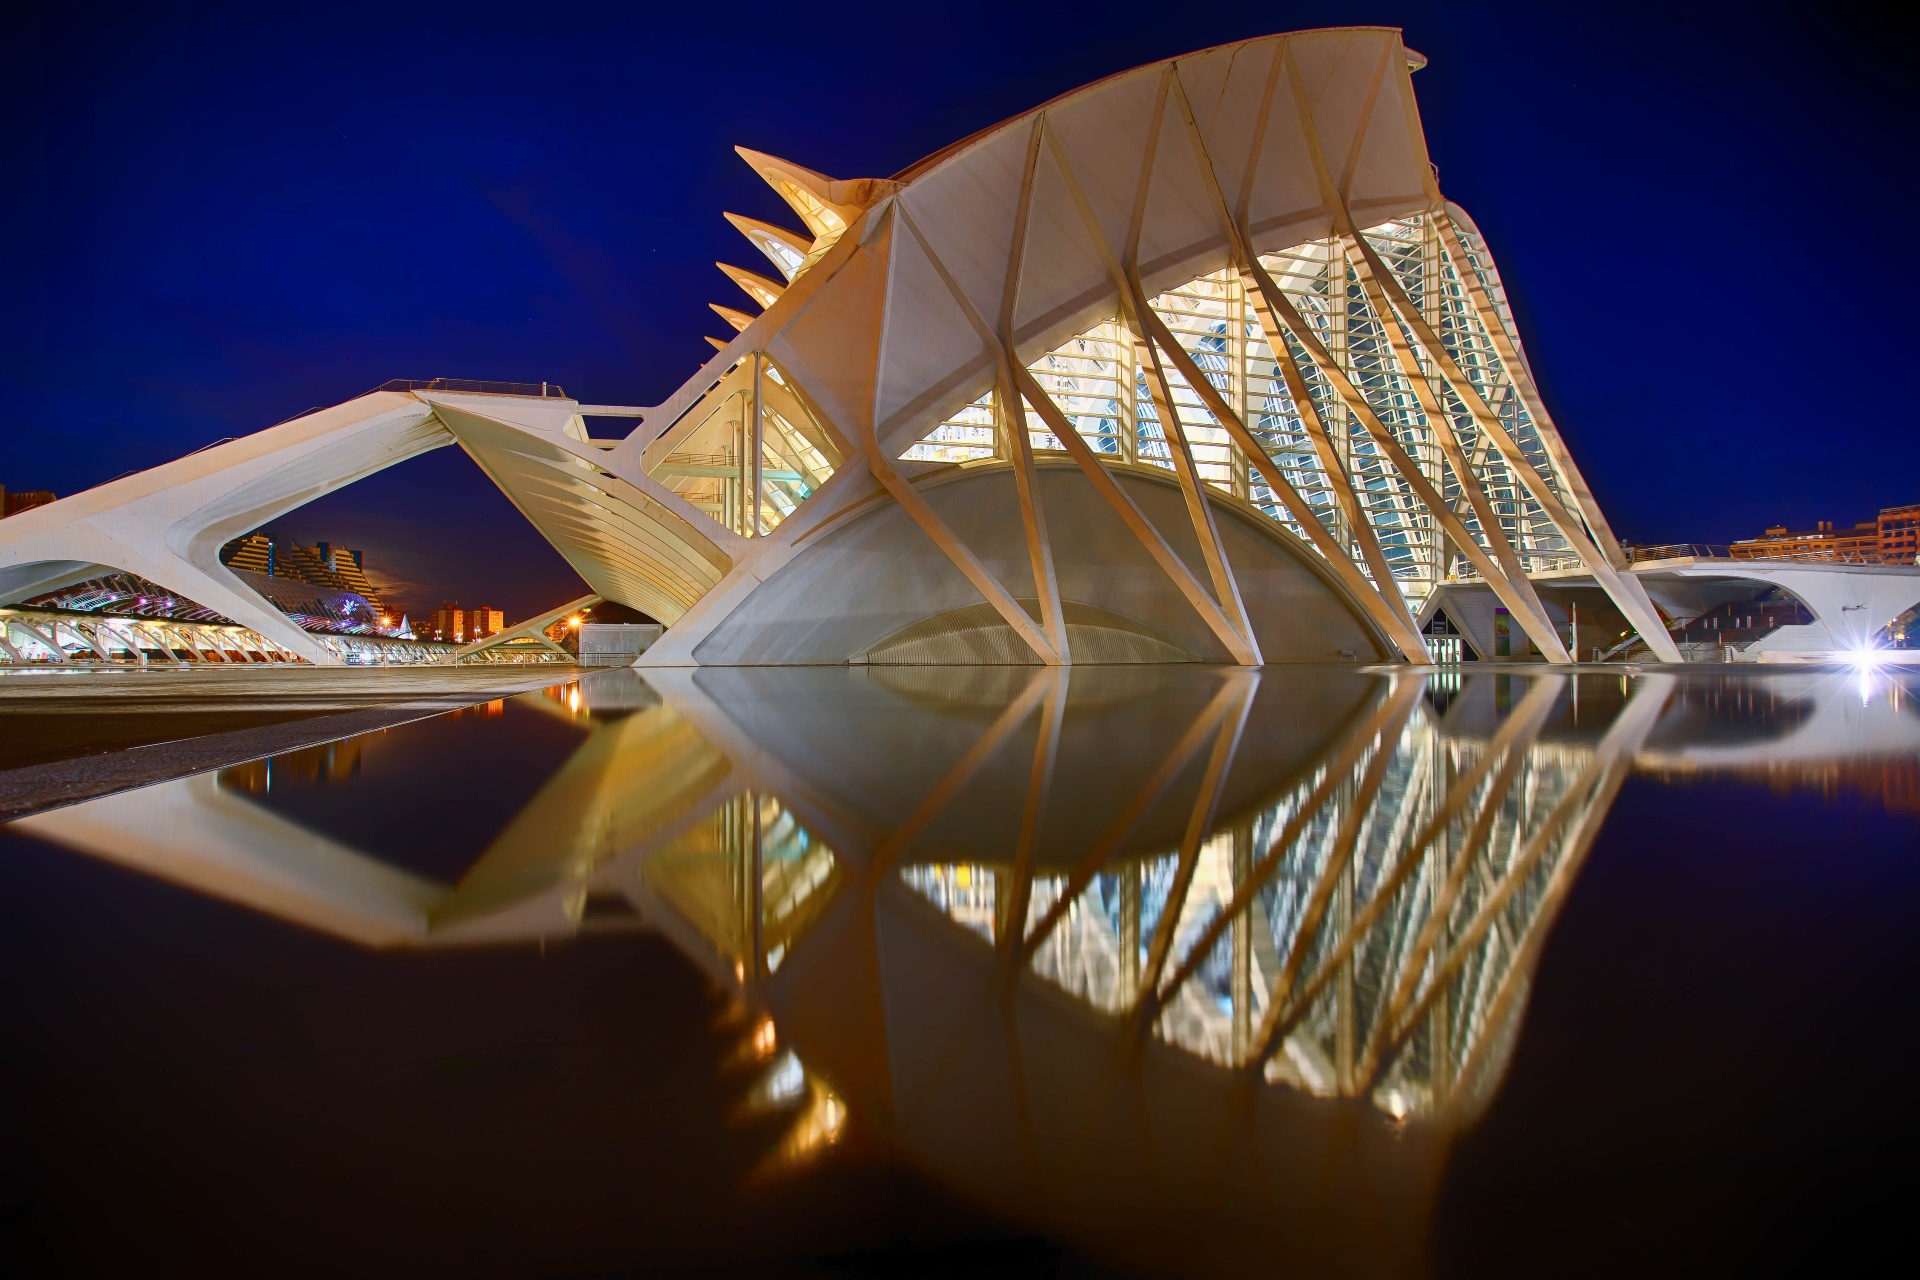 Valencia Spain Architecture Night Building Lights Reflection 1920x1280